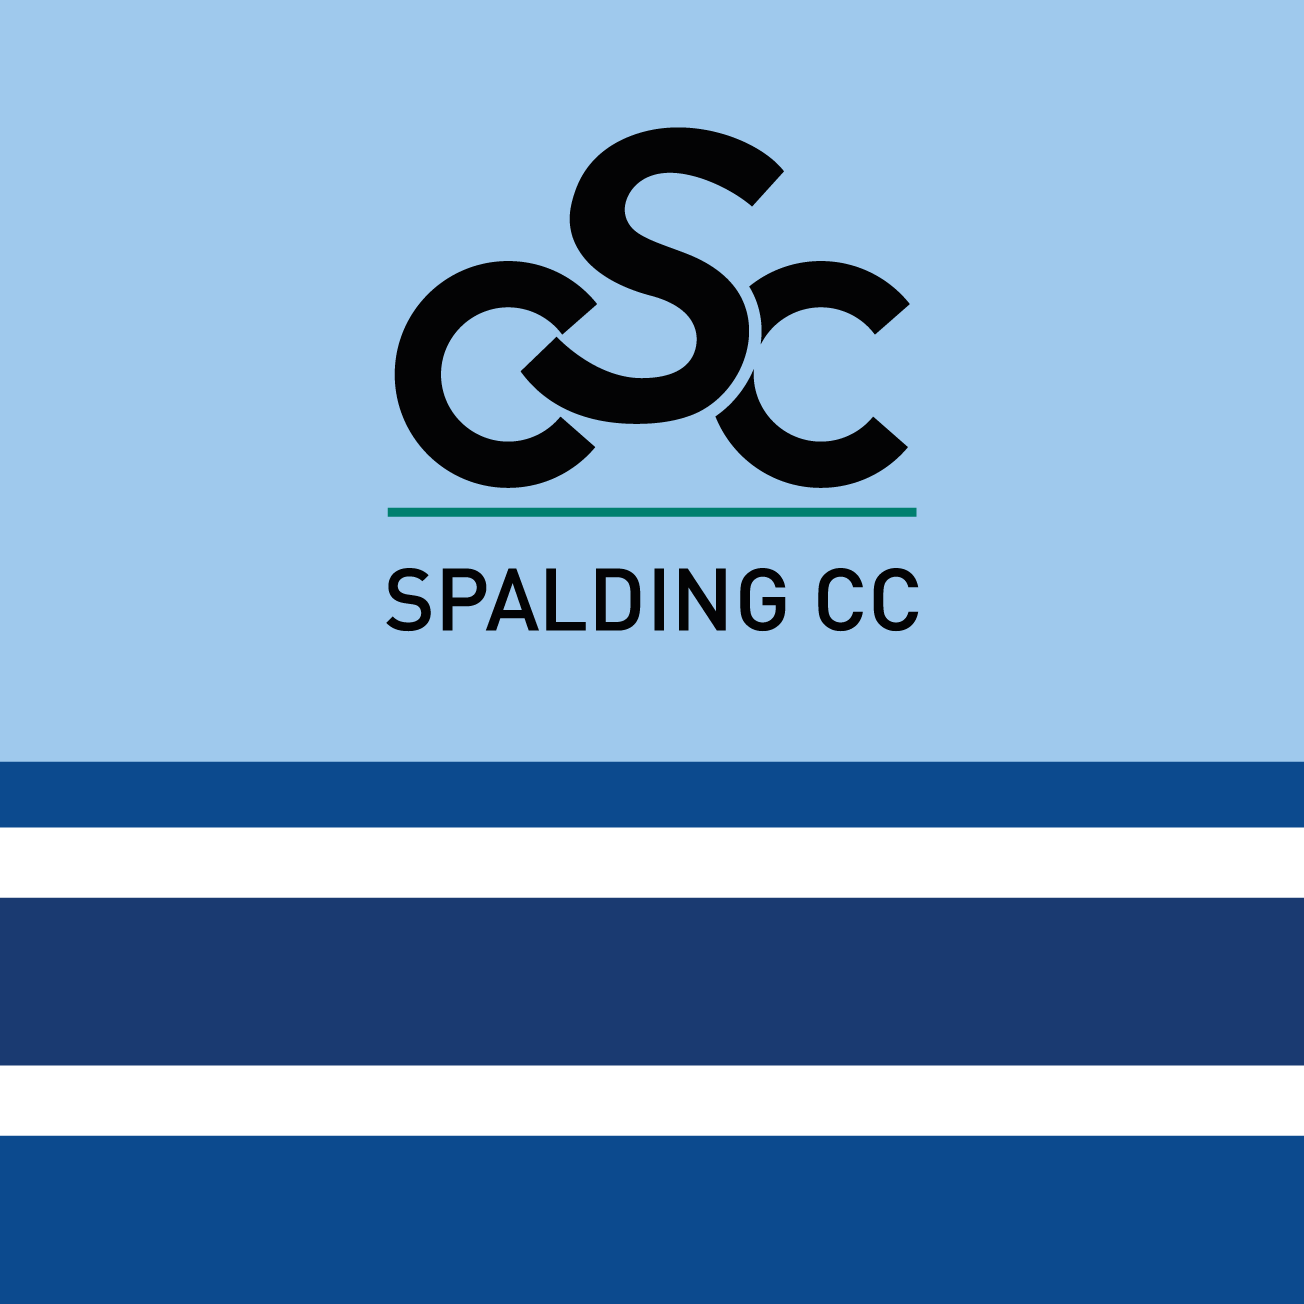 Club Image for SPALDING CC